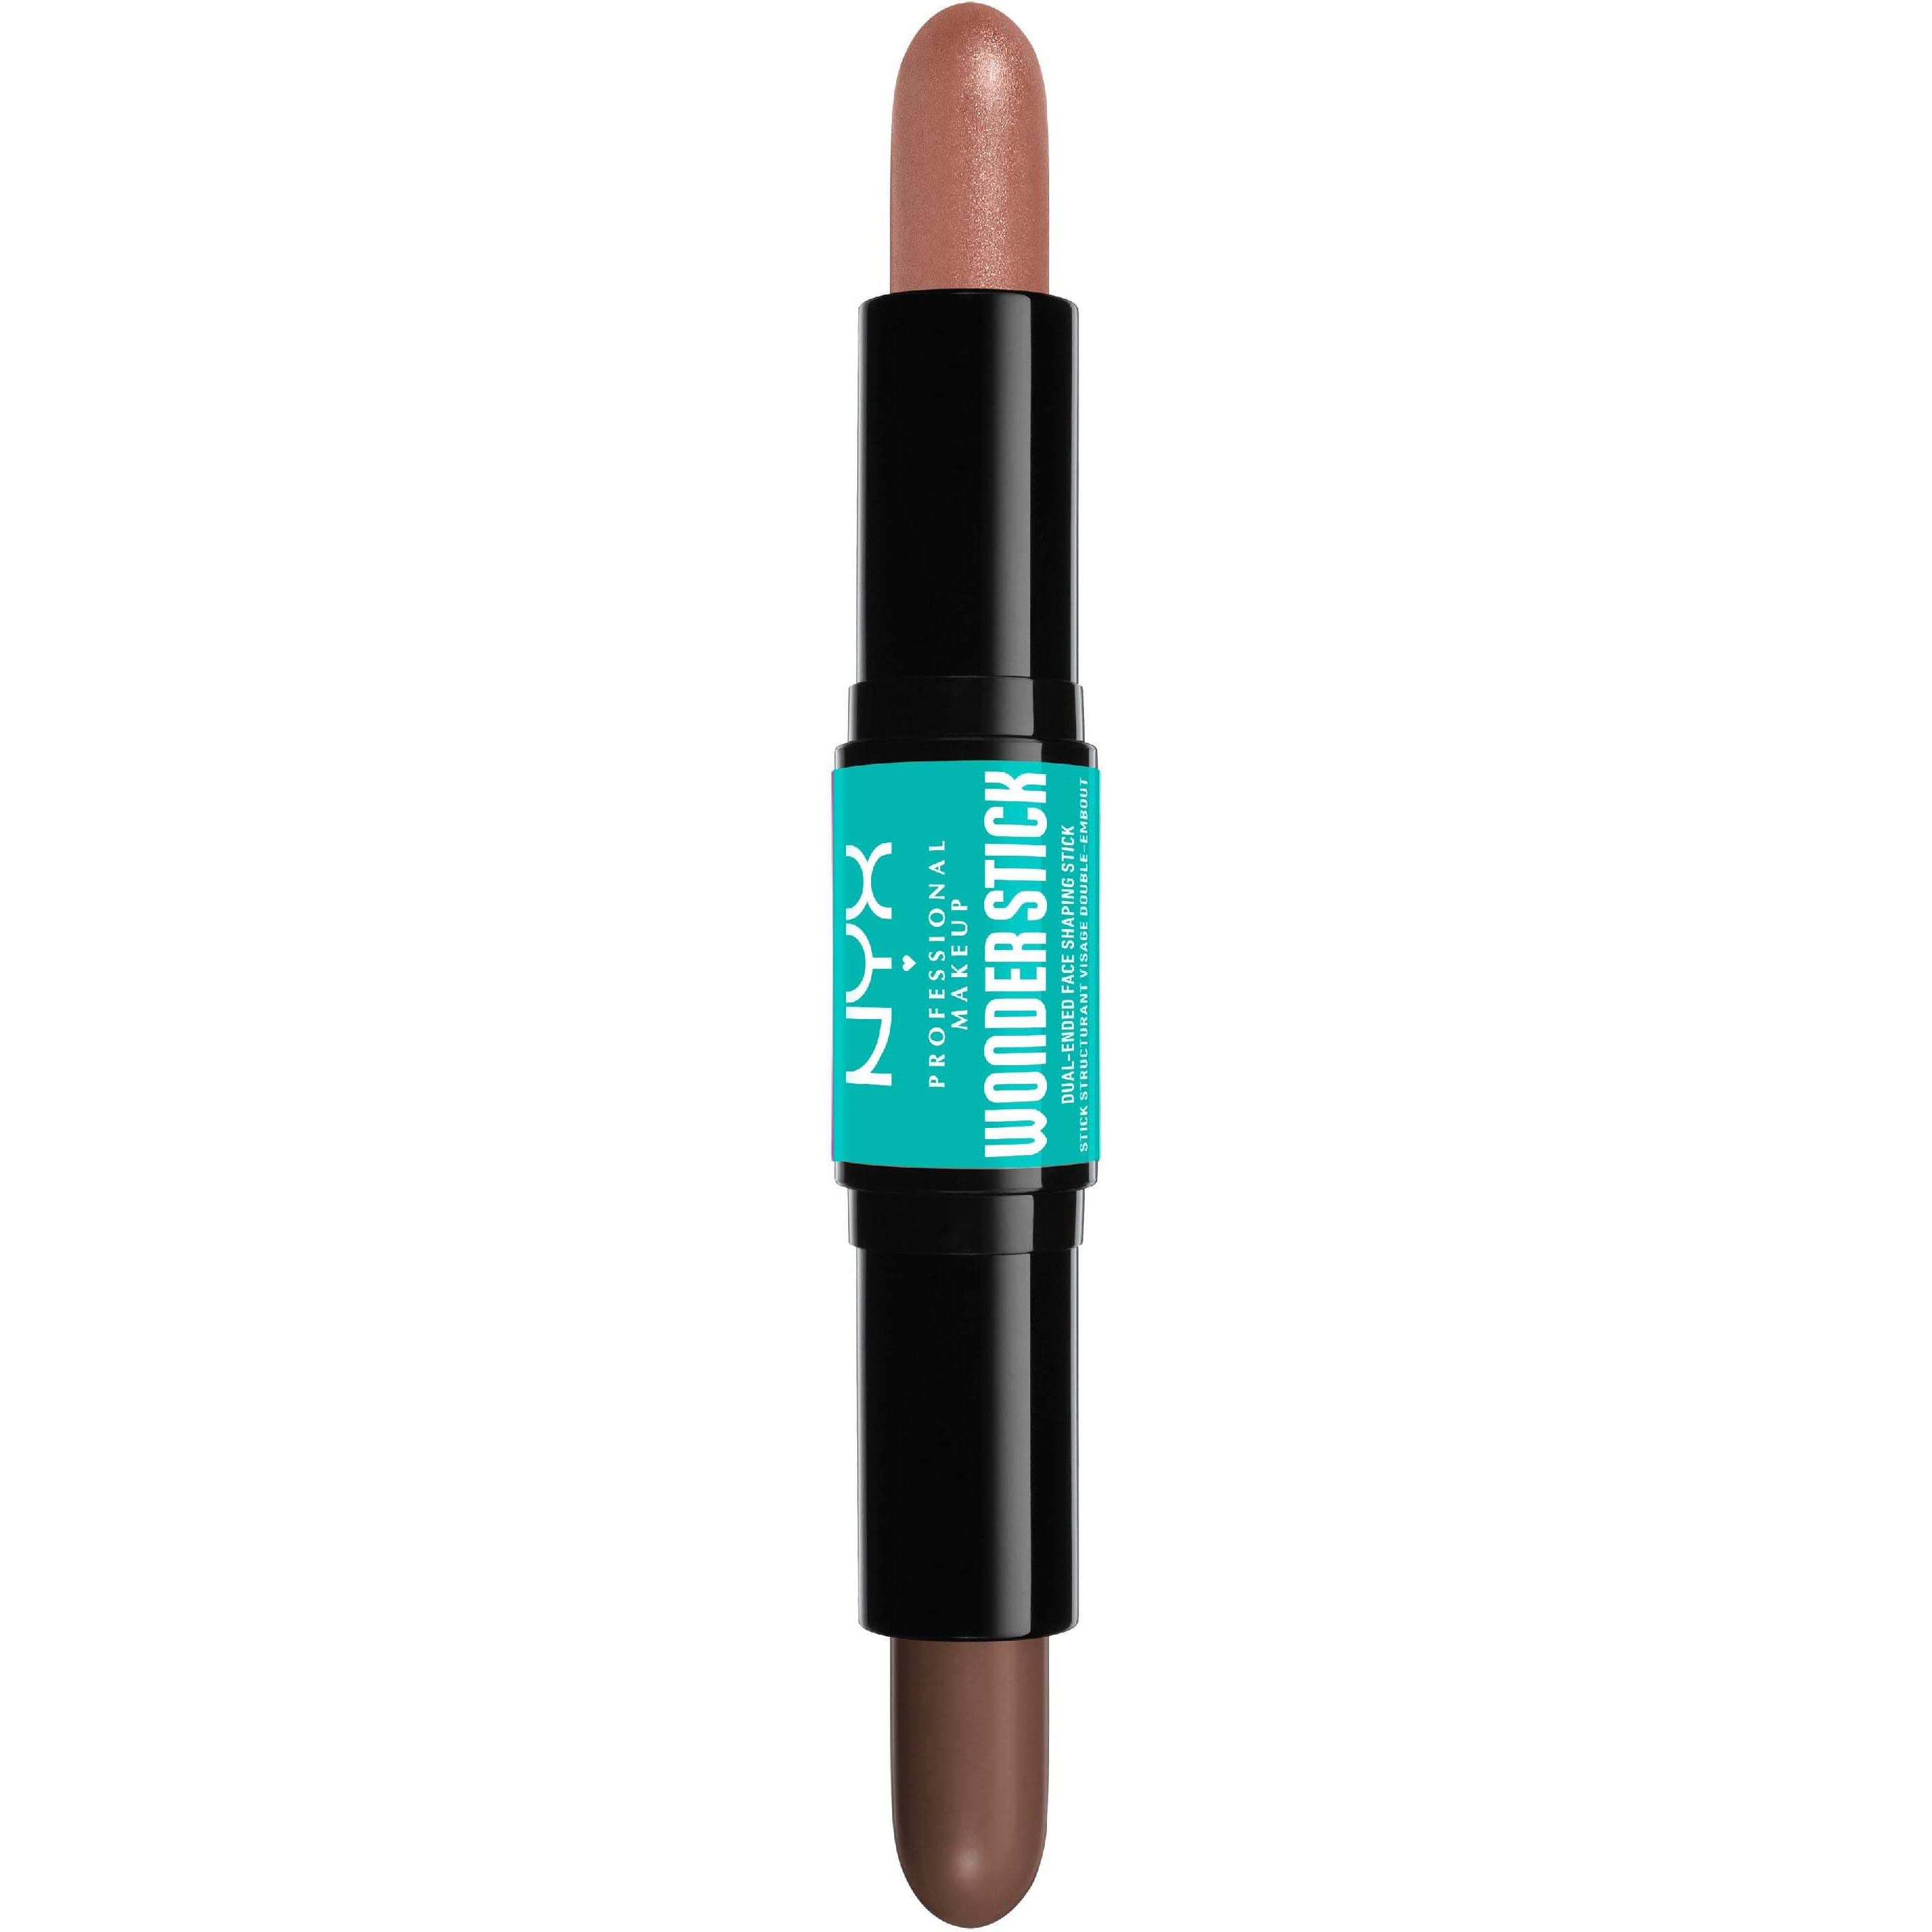 Läs mer om NYX PROFESSIONAL MAKEUP Wonder Stick Dual-Ended Face Shaping Stick 03